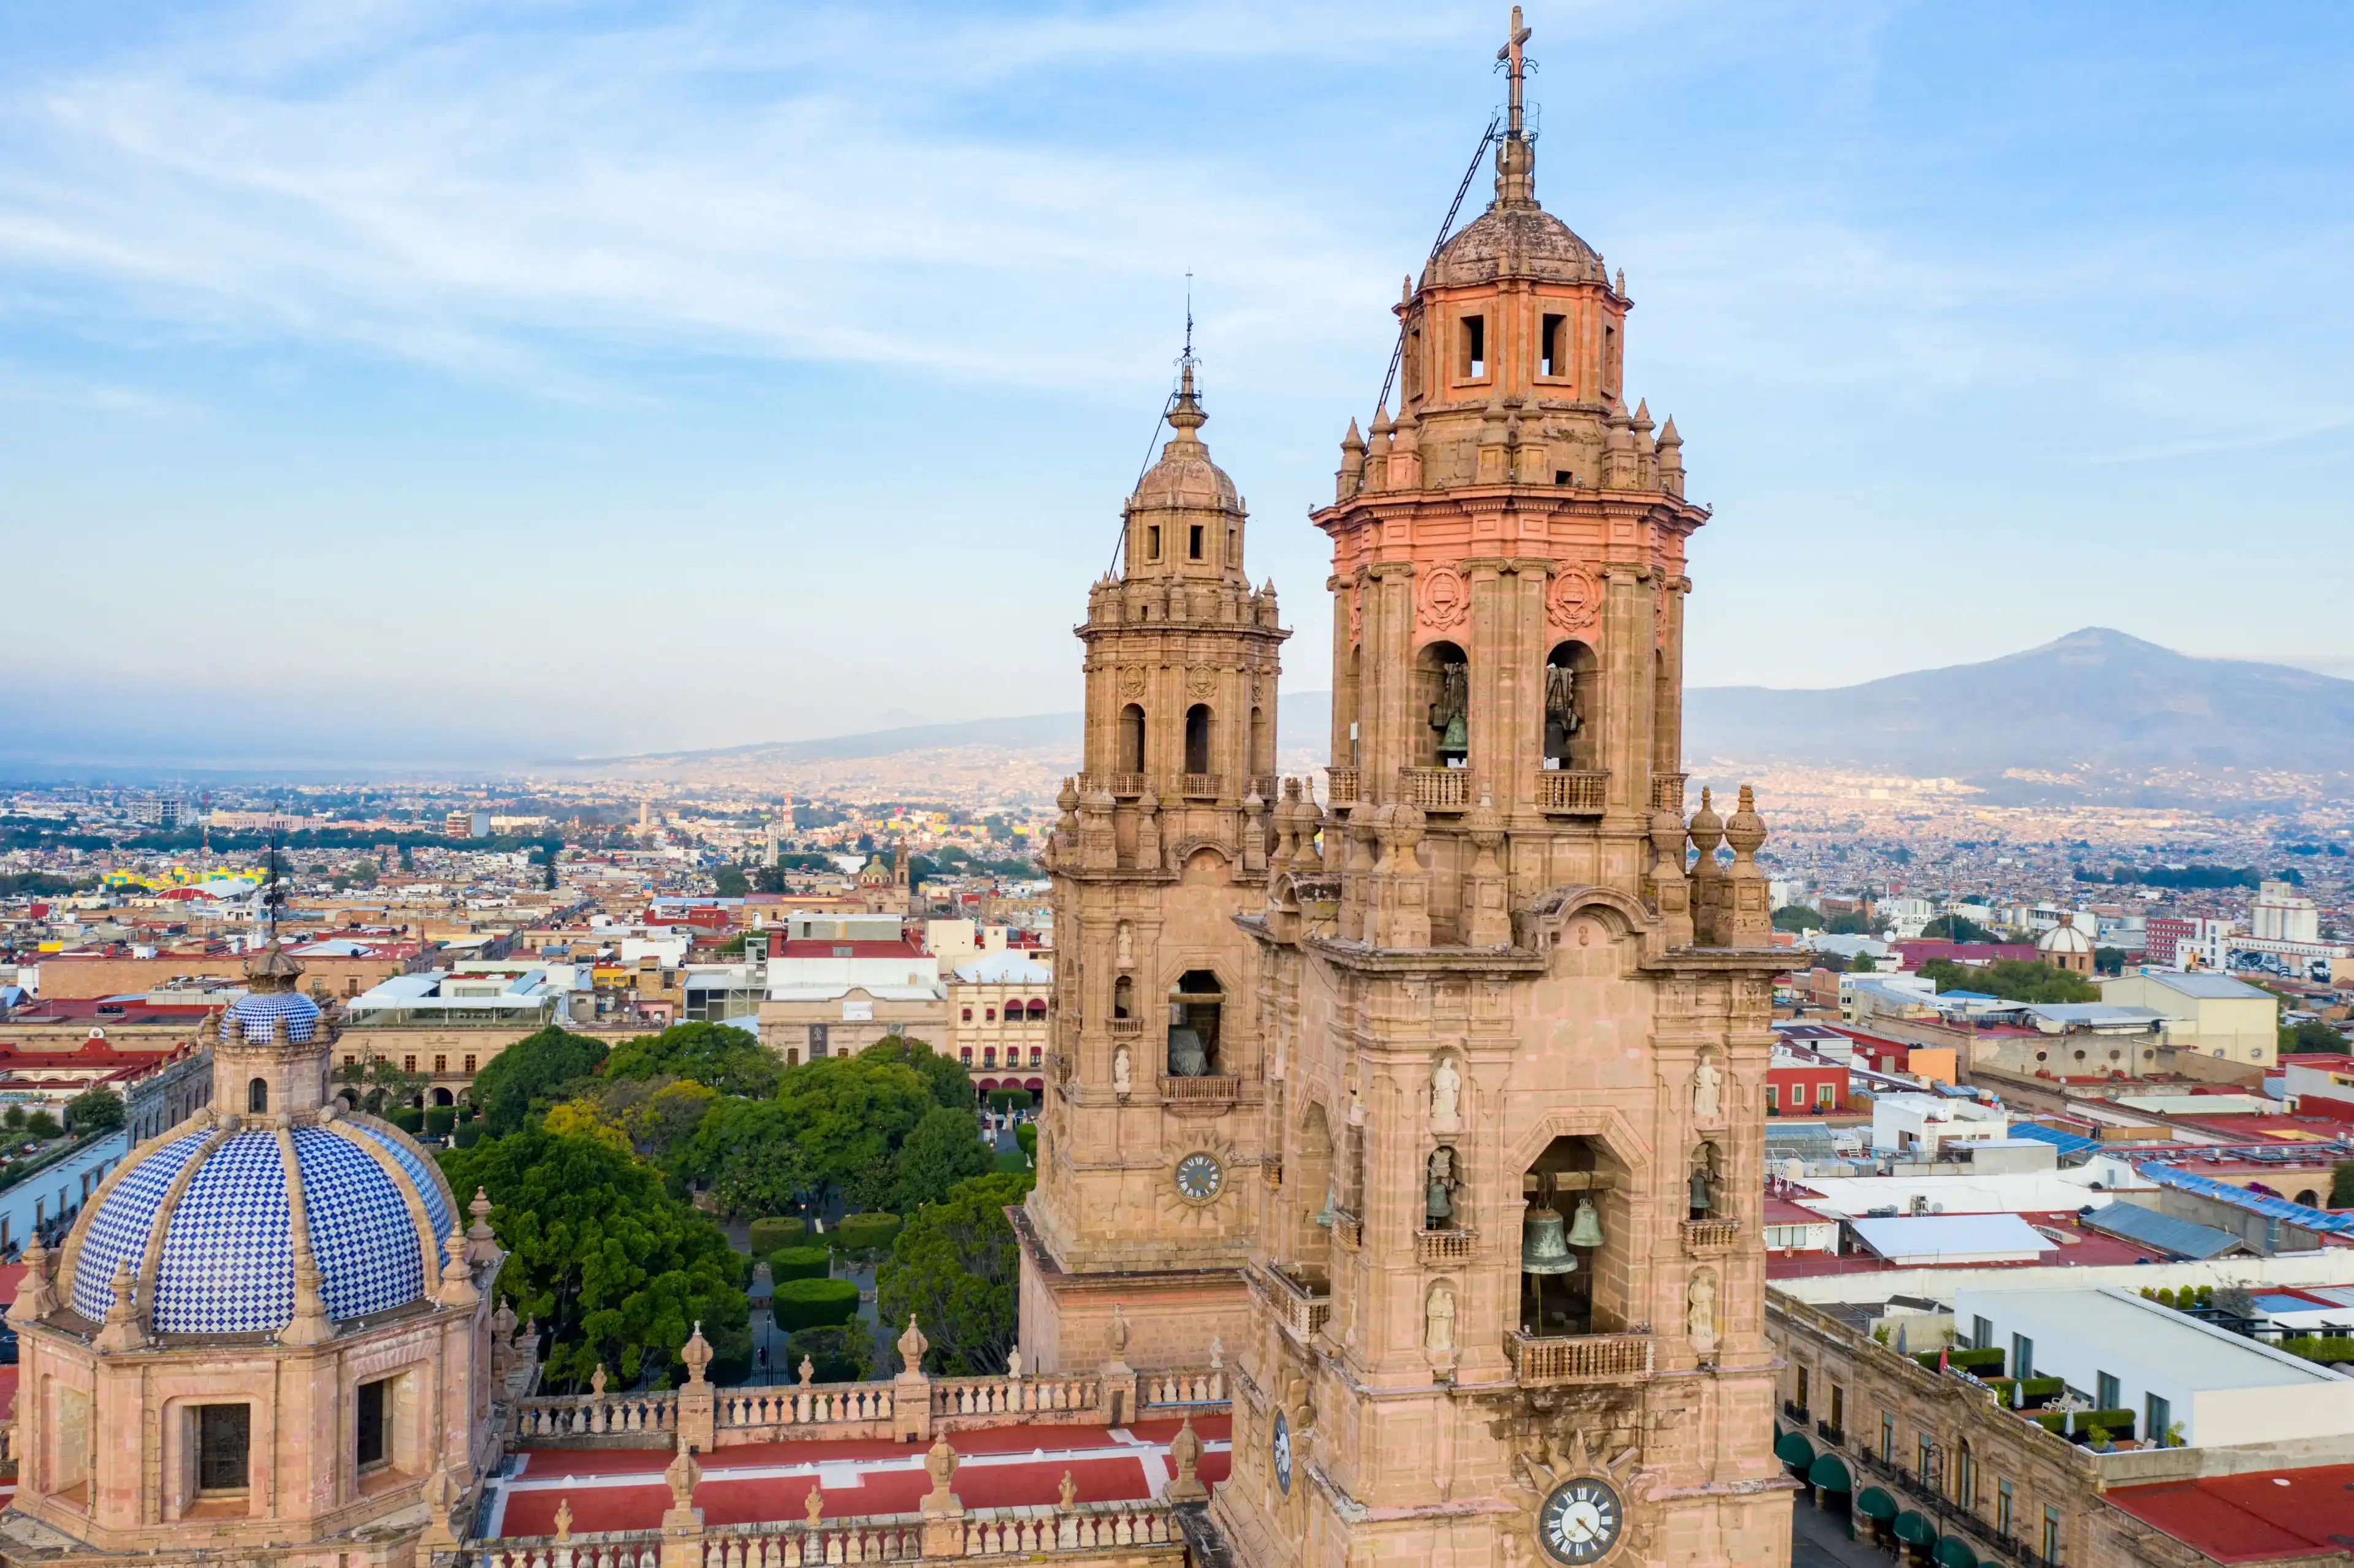 Best Morelia hotels. Cheap hotels in Morelia, Michoacán, Mexico